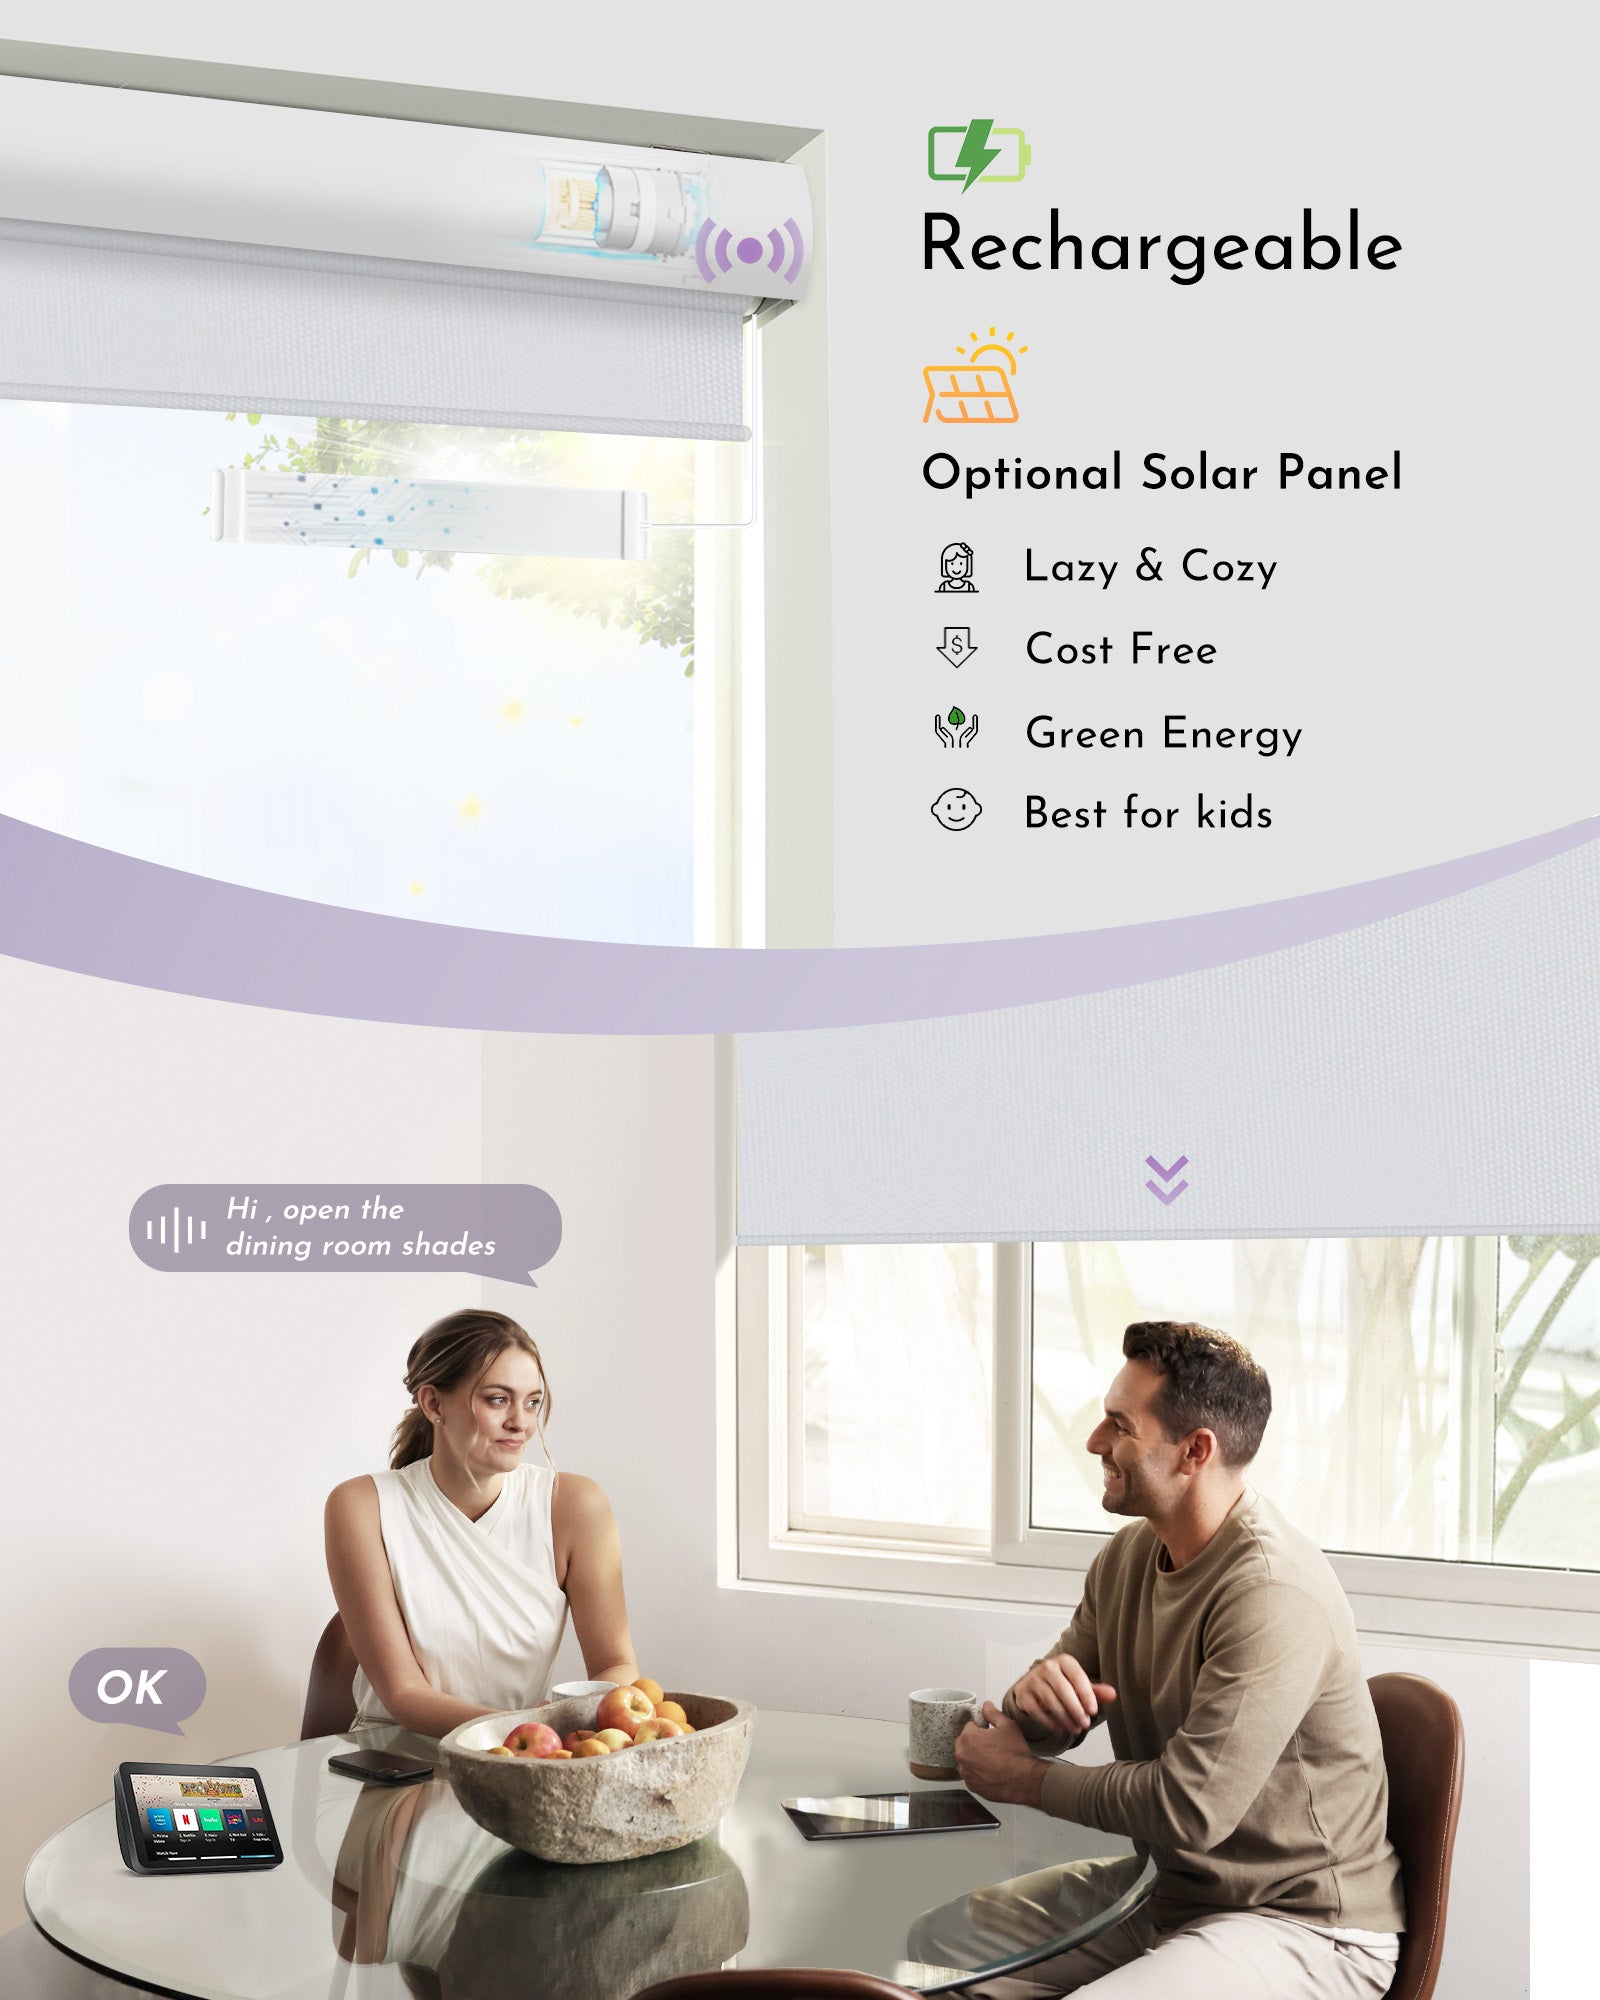 Powered by solar panel, take the benefits of green & cost free energy and cozy lifestyle.